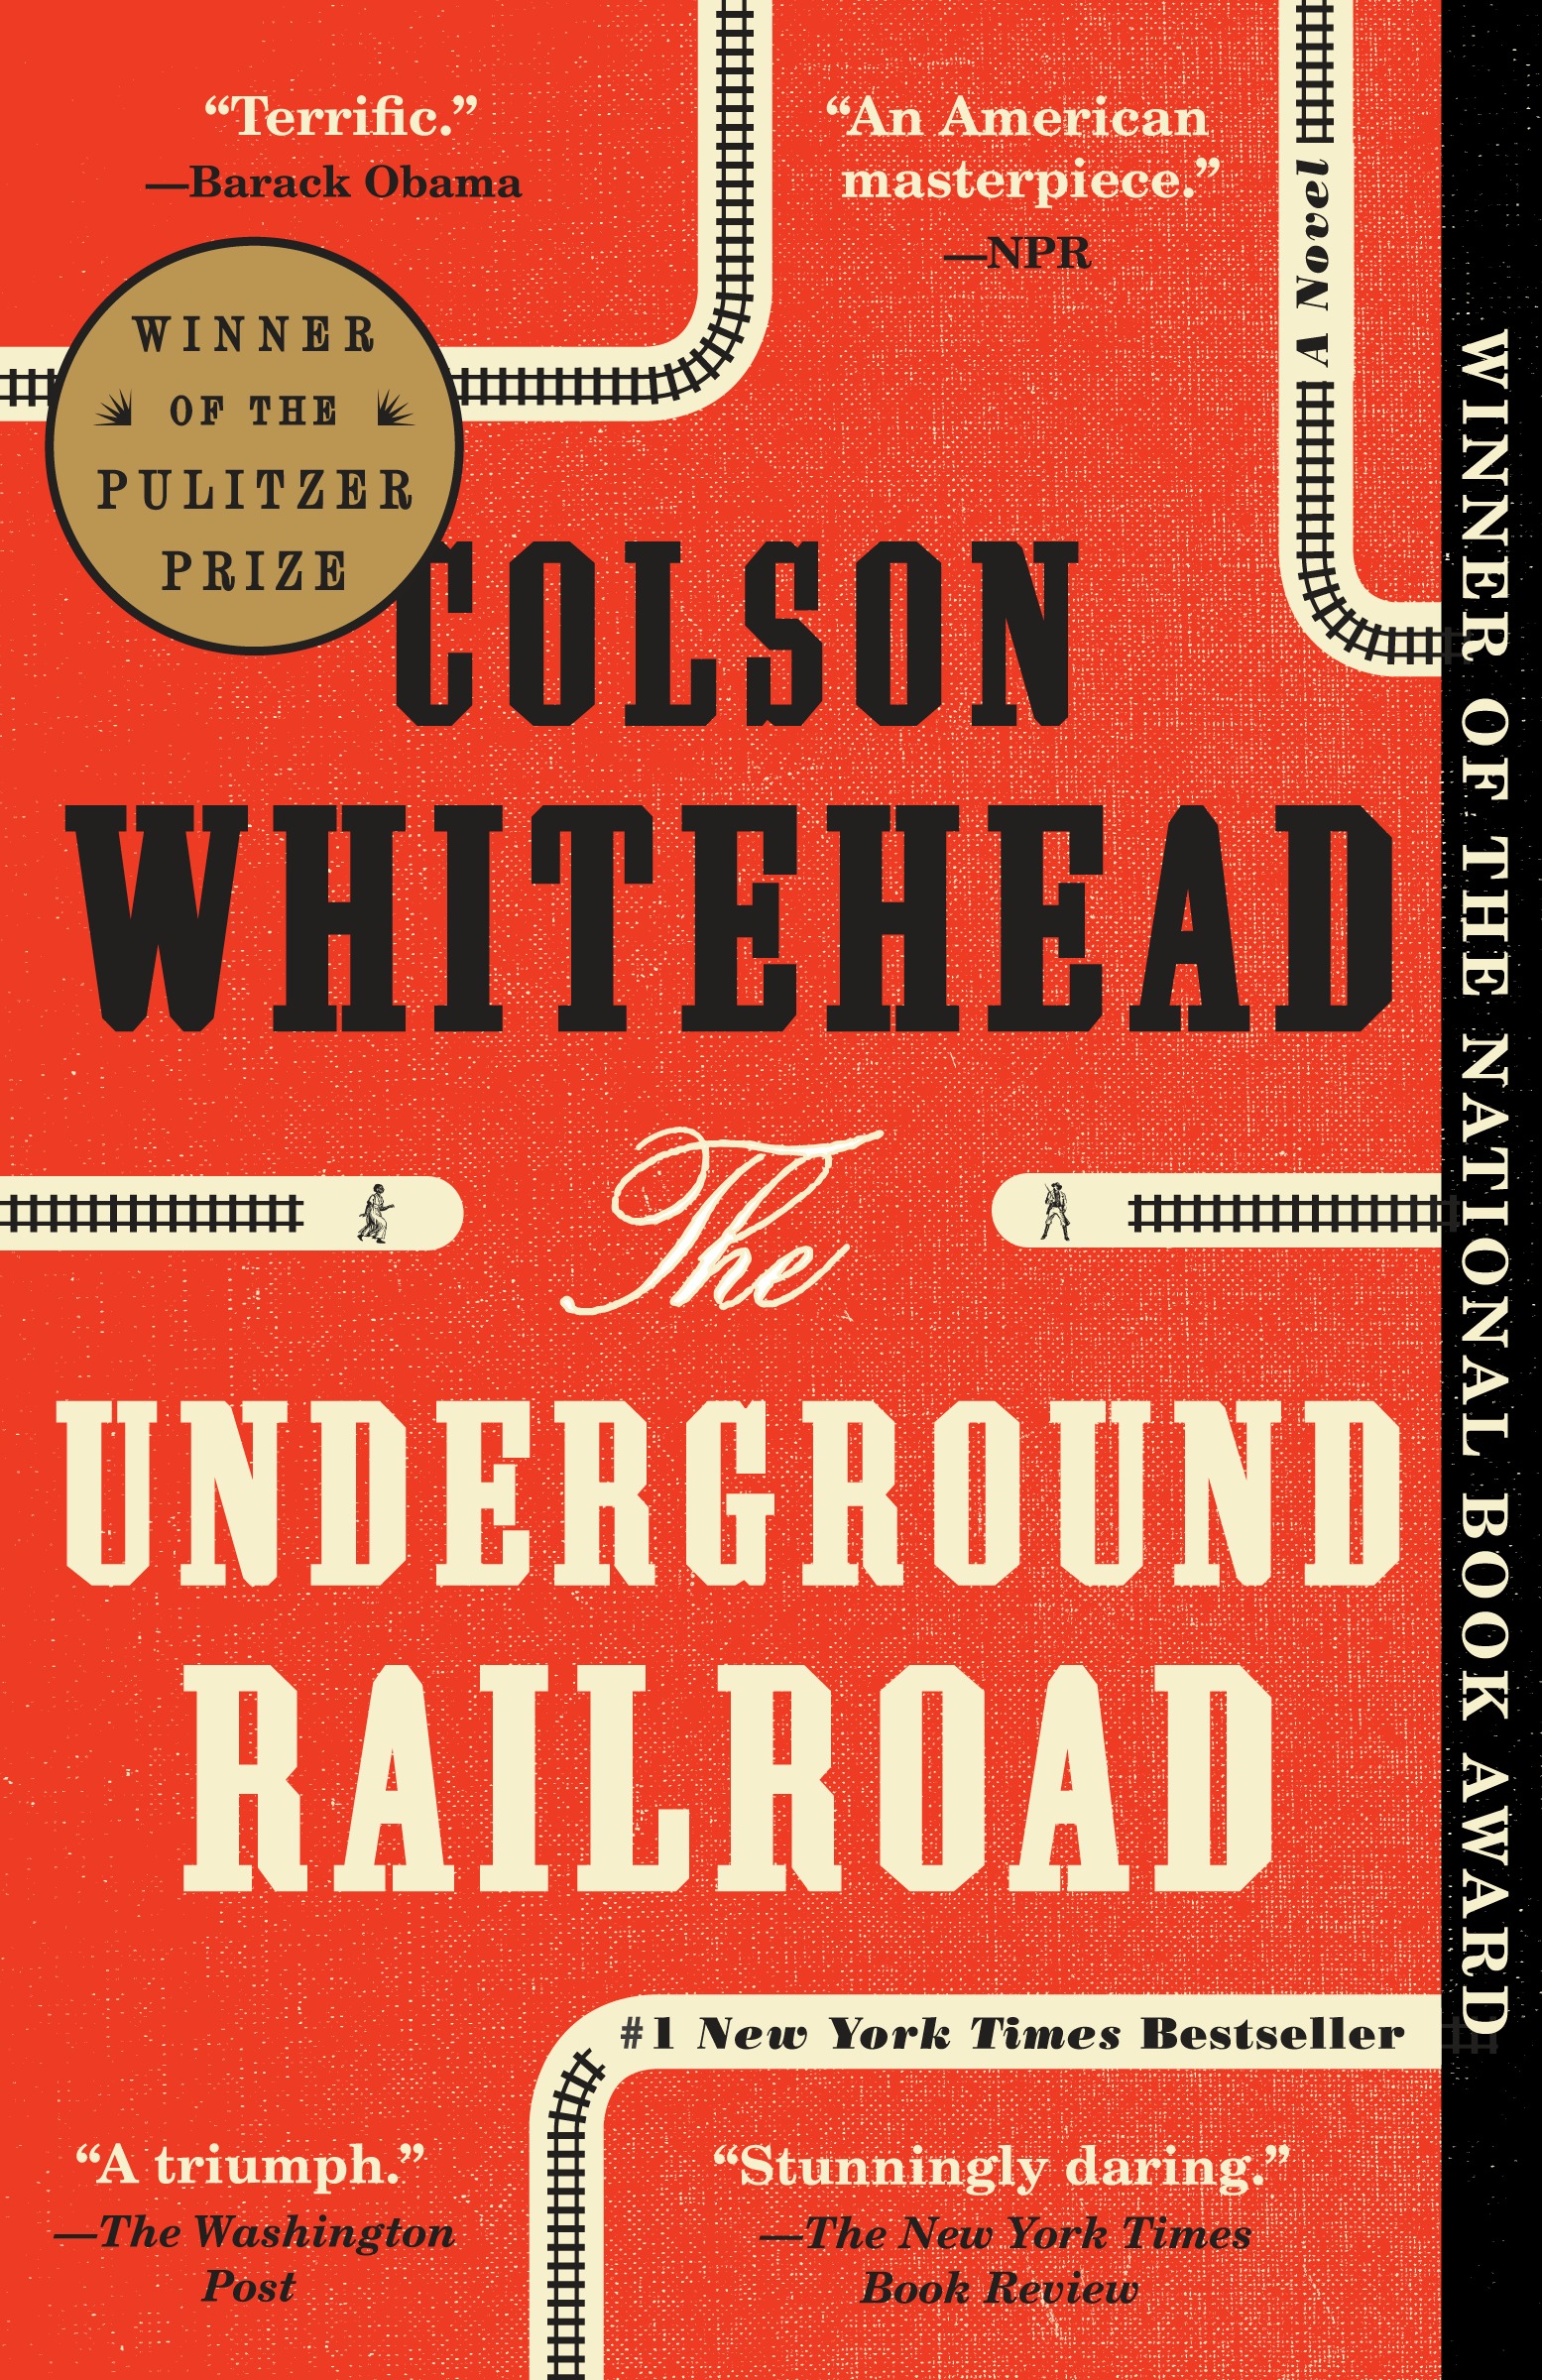 back book cover for "Underground Railroad" by Colson Whitehead 